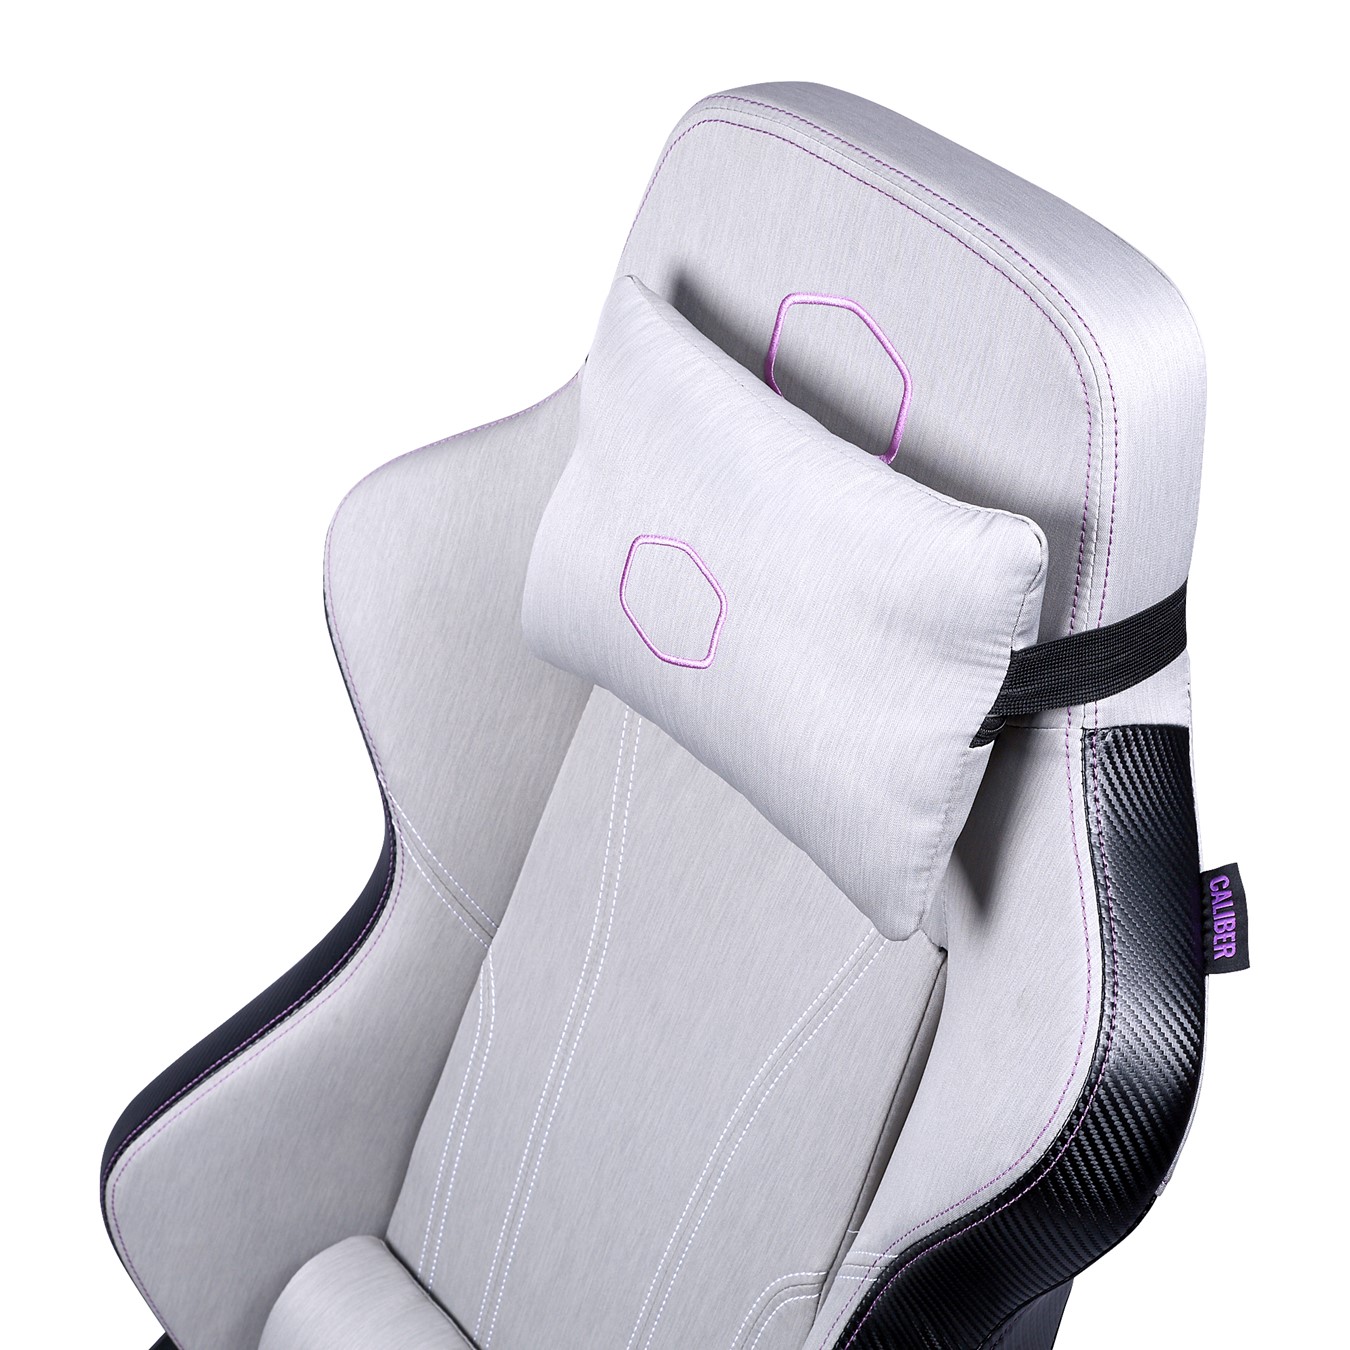 Caliber X1C Gaming Chair - The headrest and lumbar pillow will provide you with the best level of comfort to reduce back pain and alleviate neck strain.